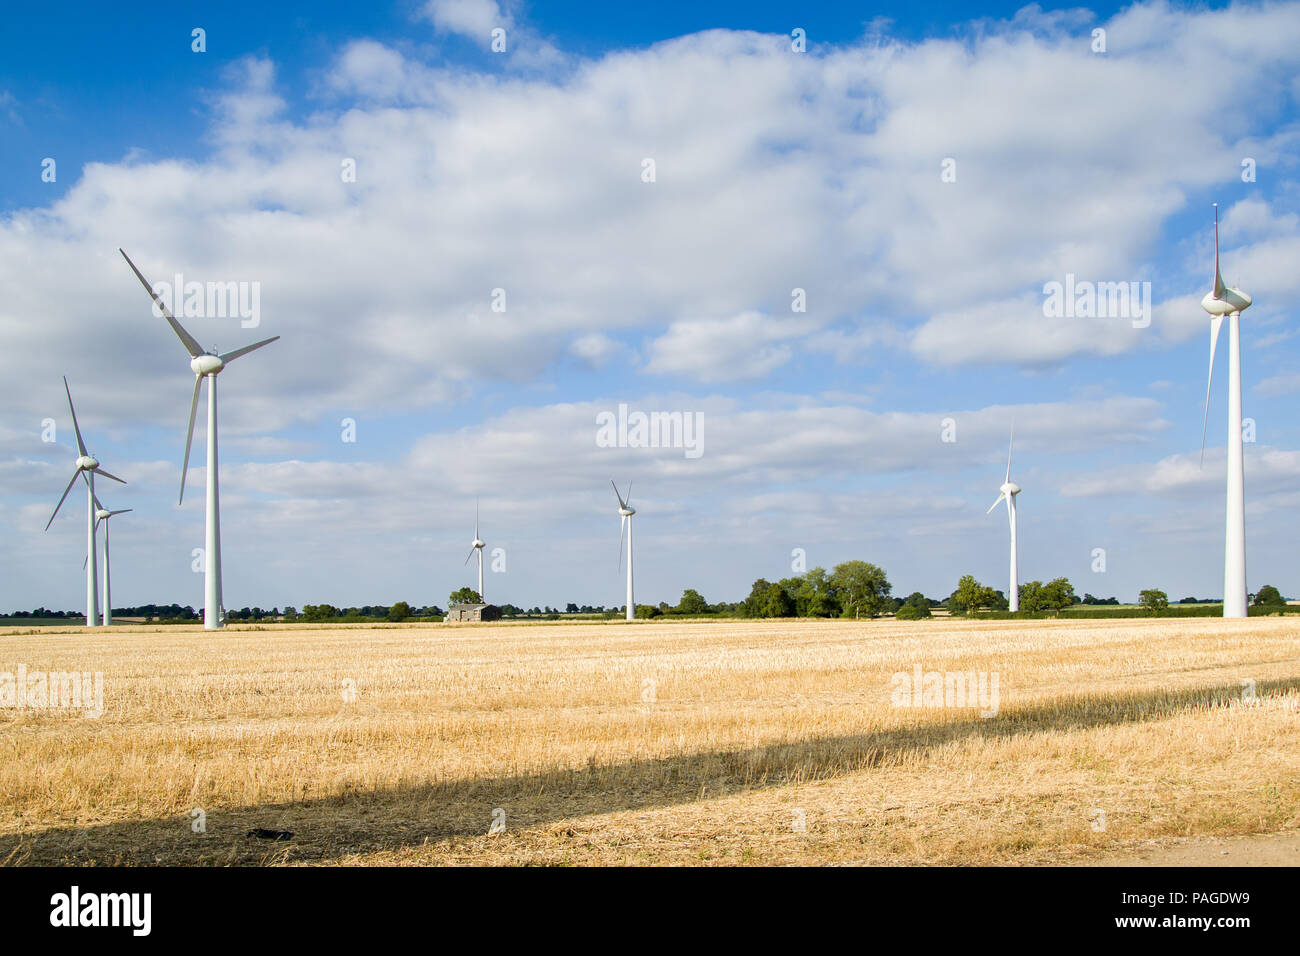 Wind Farm Turbines, Wheat field, blue skies, white fluffy clouds green trees in the background. Six Hills nr Loughborough Leicestershire England UK. Stock Photo